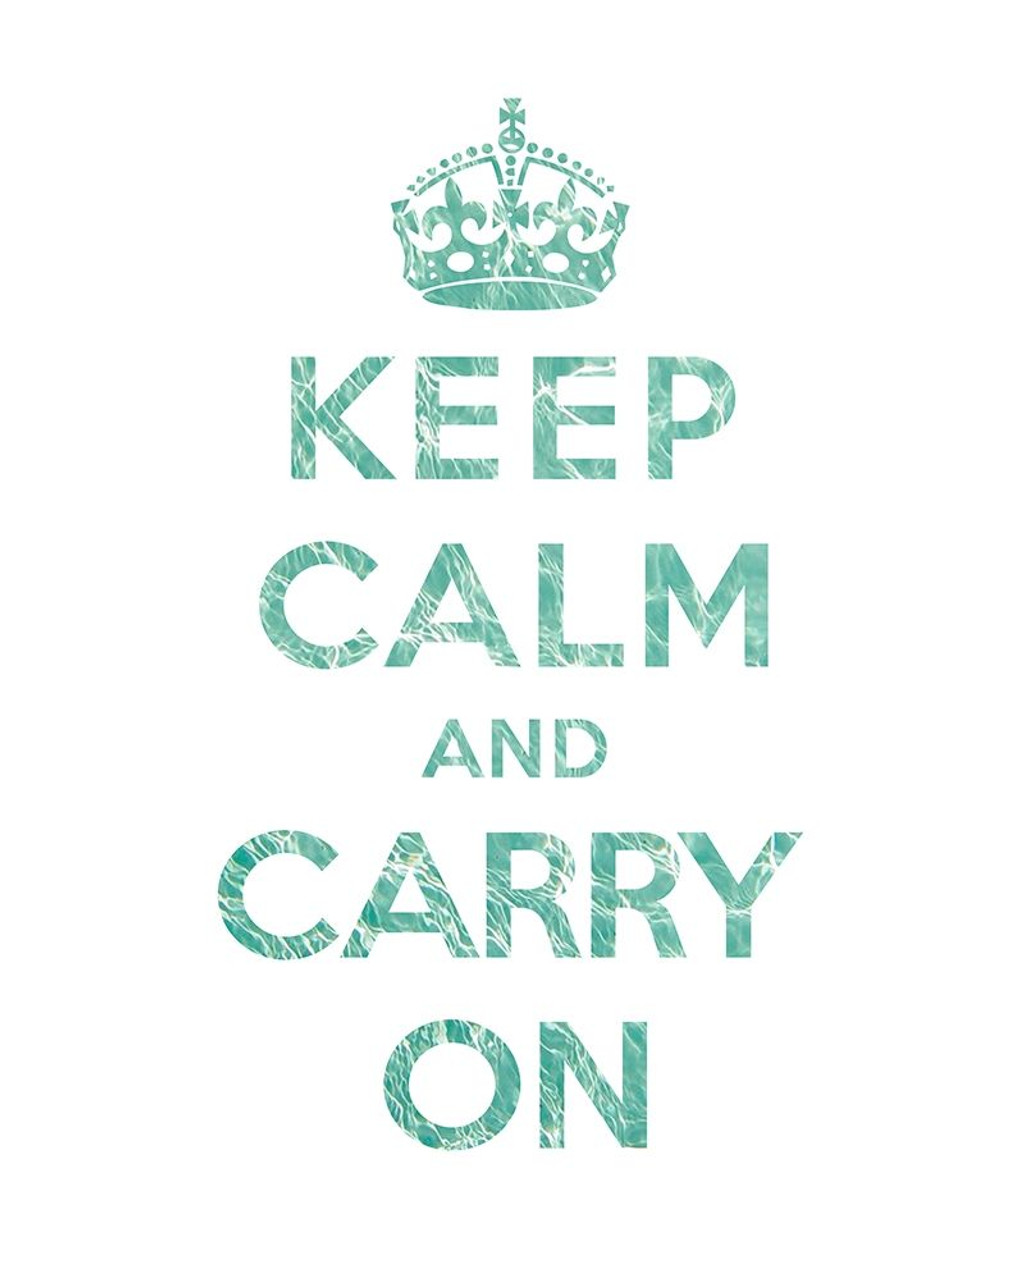 keep calm and carry on crown green